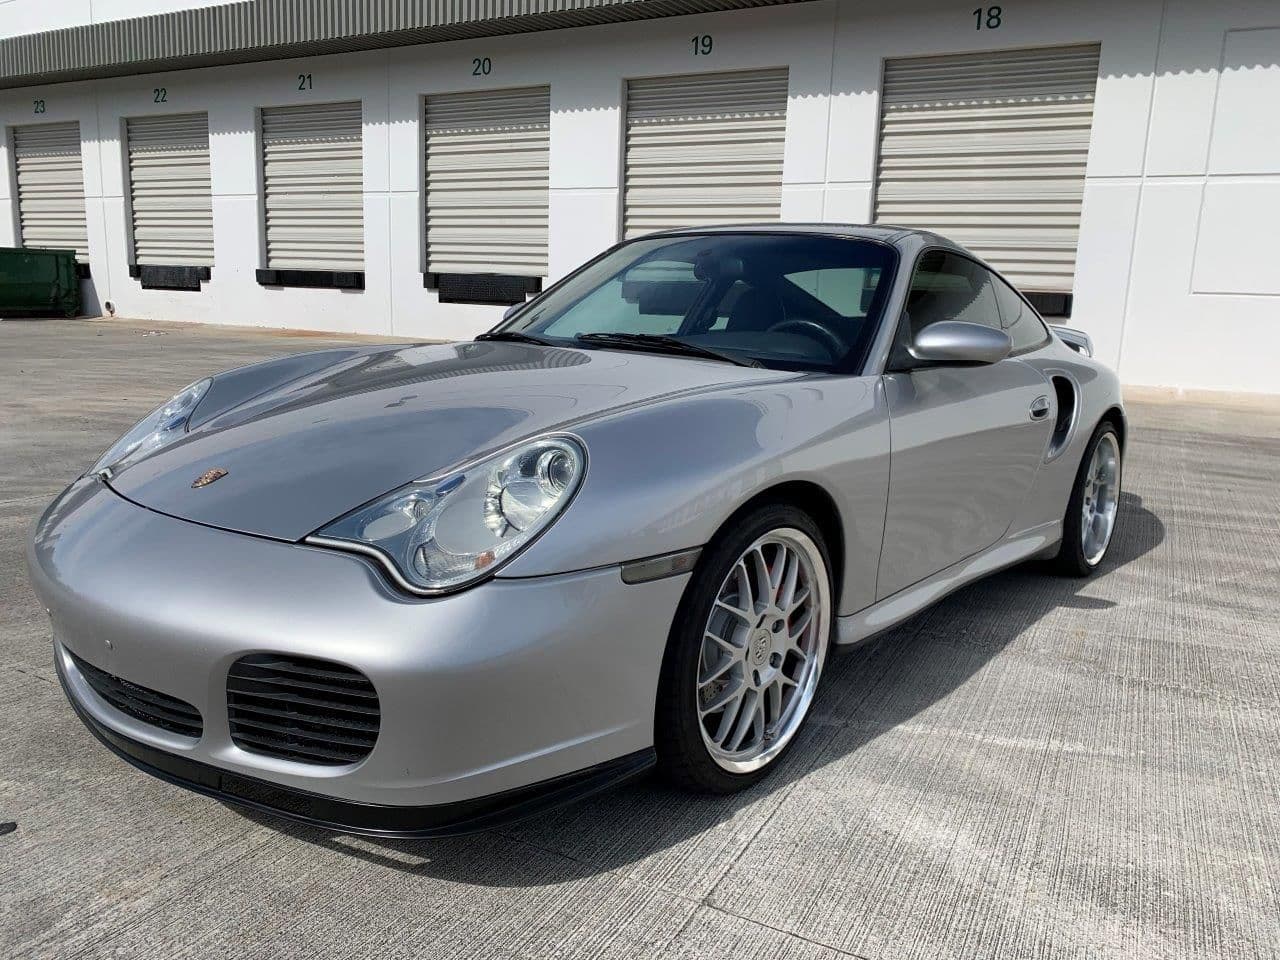 2003 Porsche 911 - Porsche 996 Turbo Coupe - 6 Speed Manual - Used - VIN WP0AB29983S686356 - 56,685 Miles - 6 cyl - AWD - Manual - Coupe - Silver - Plantation, FL 33317, United States